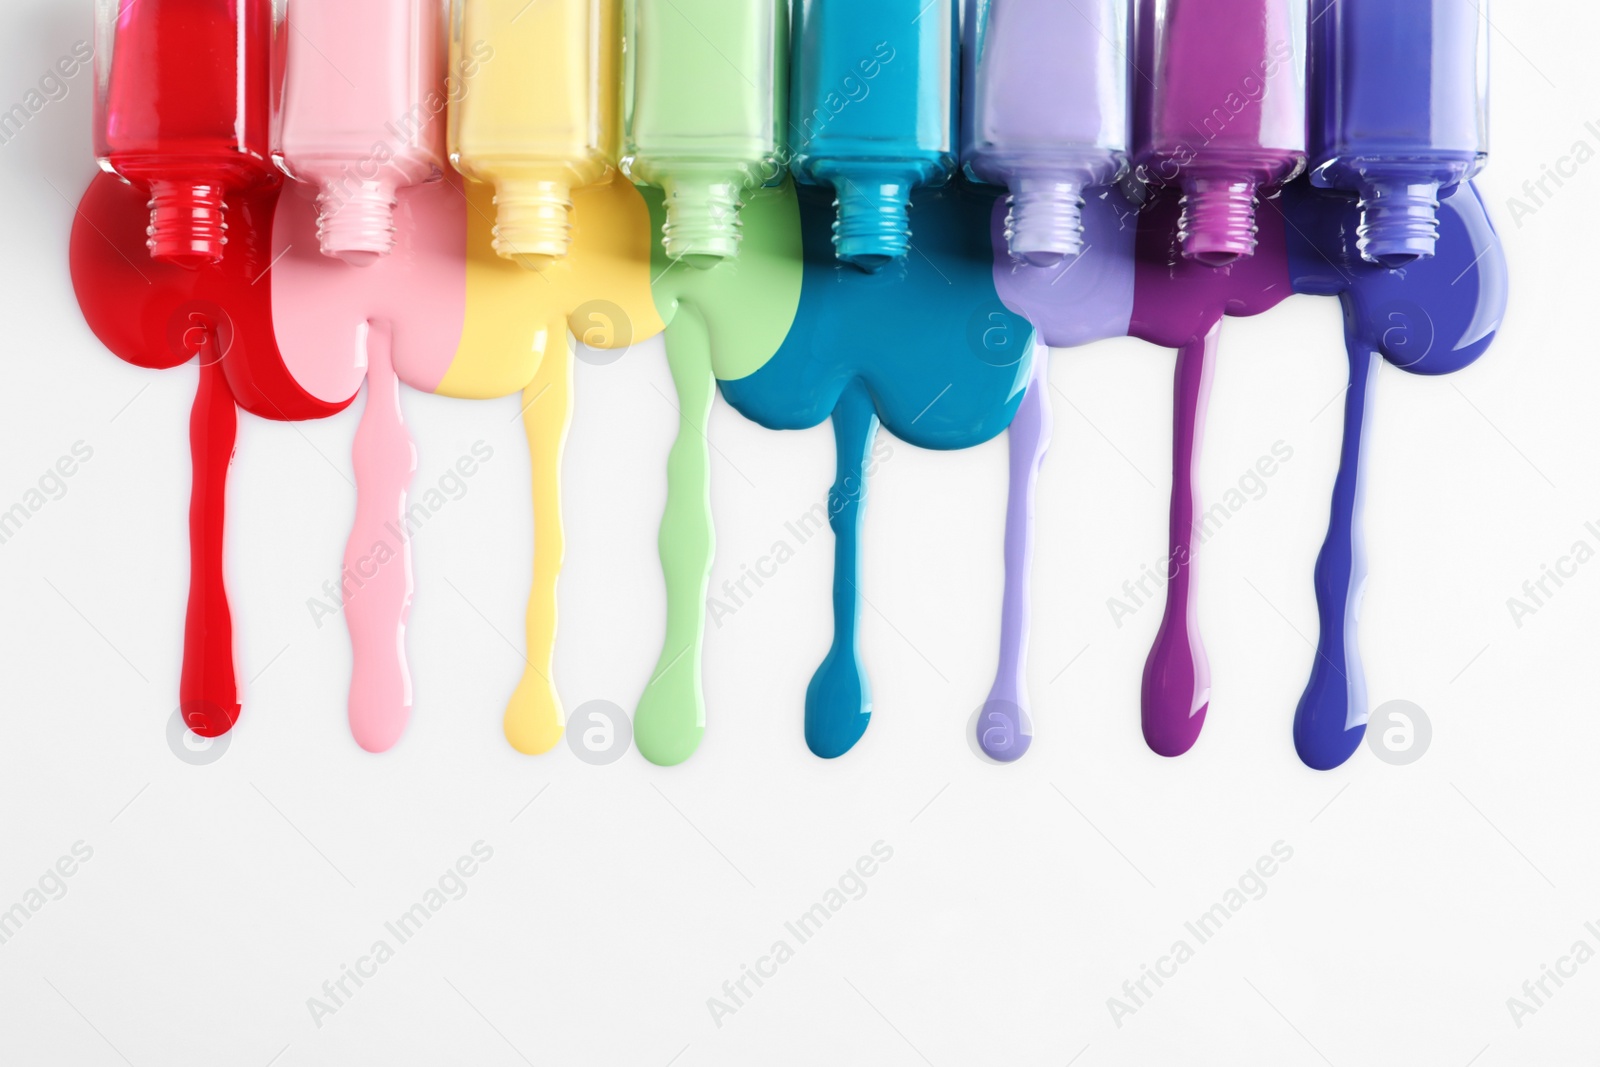 Photo of Spilled colorful nail polishes and bottles on white background, top view